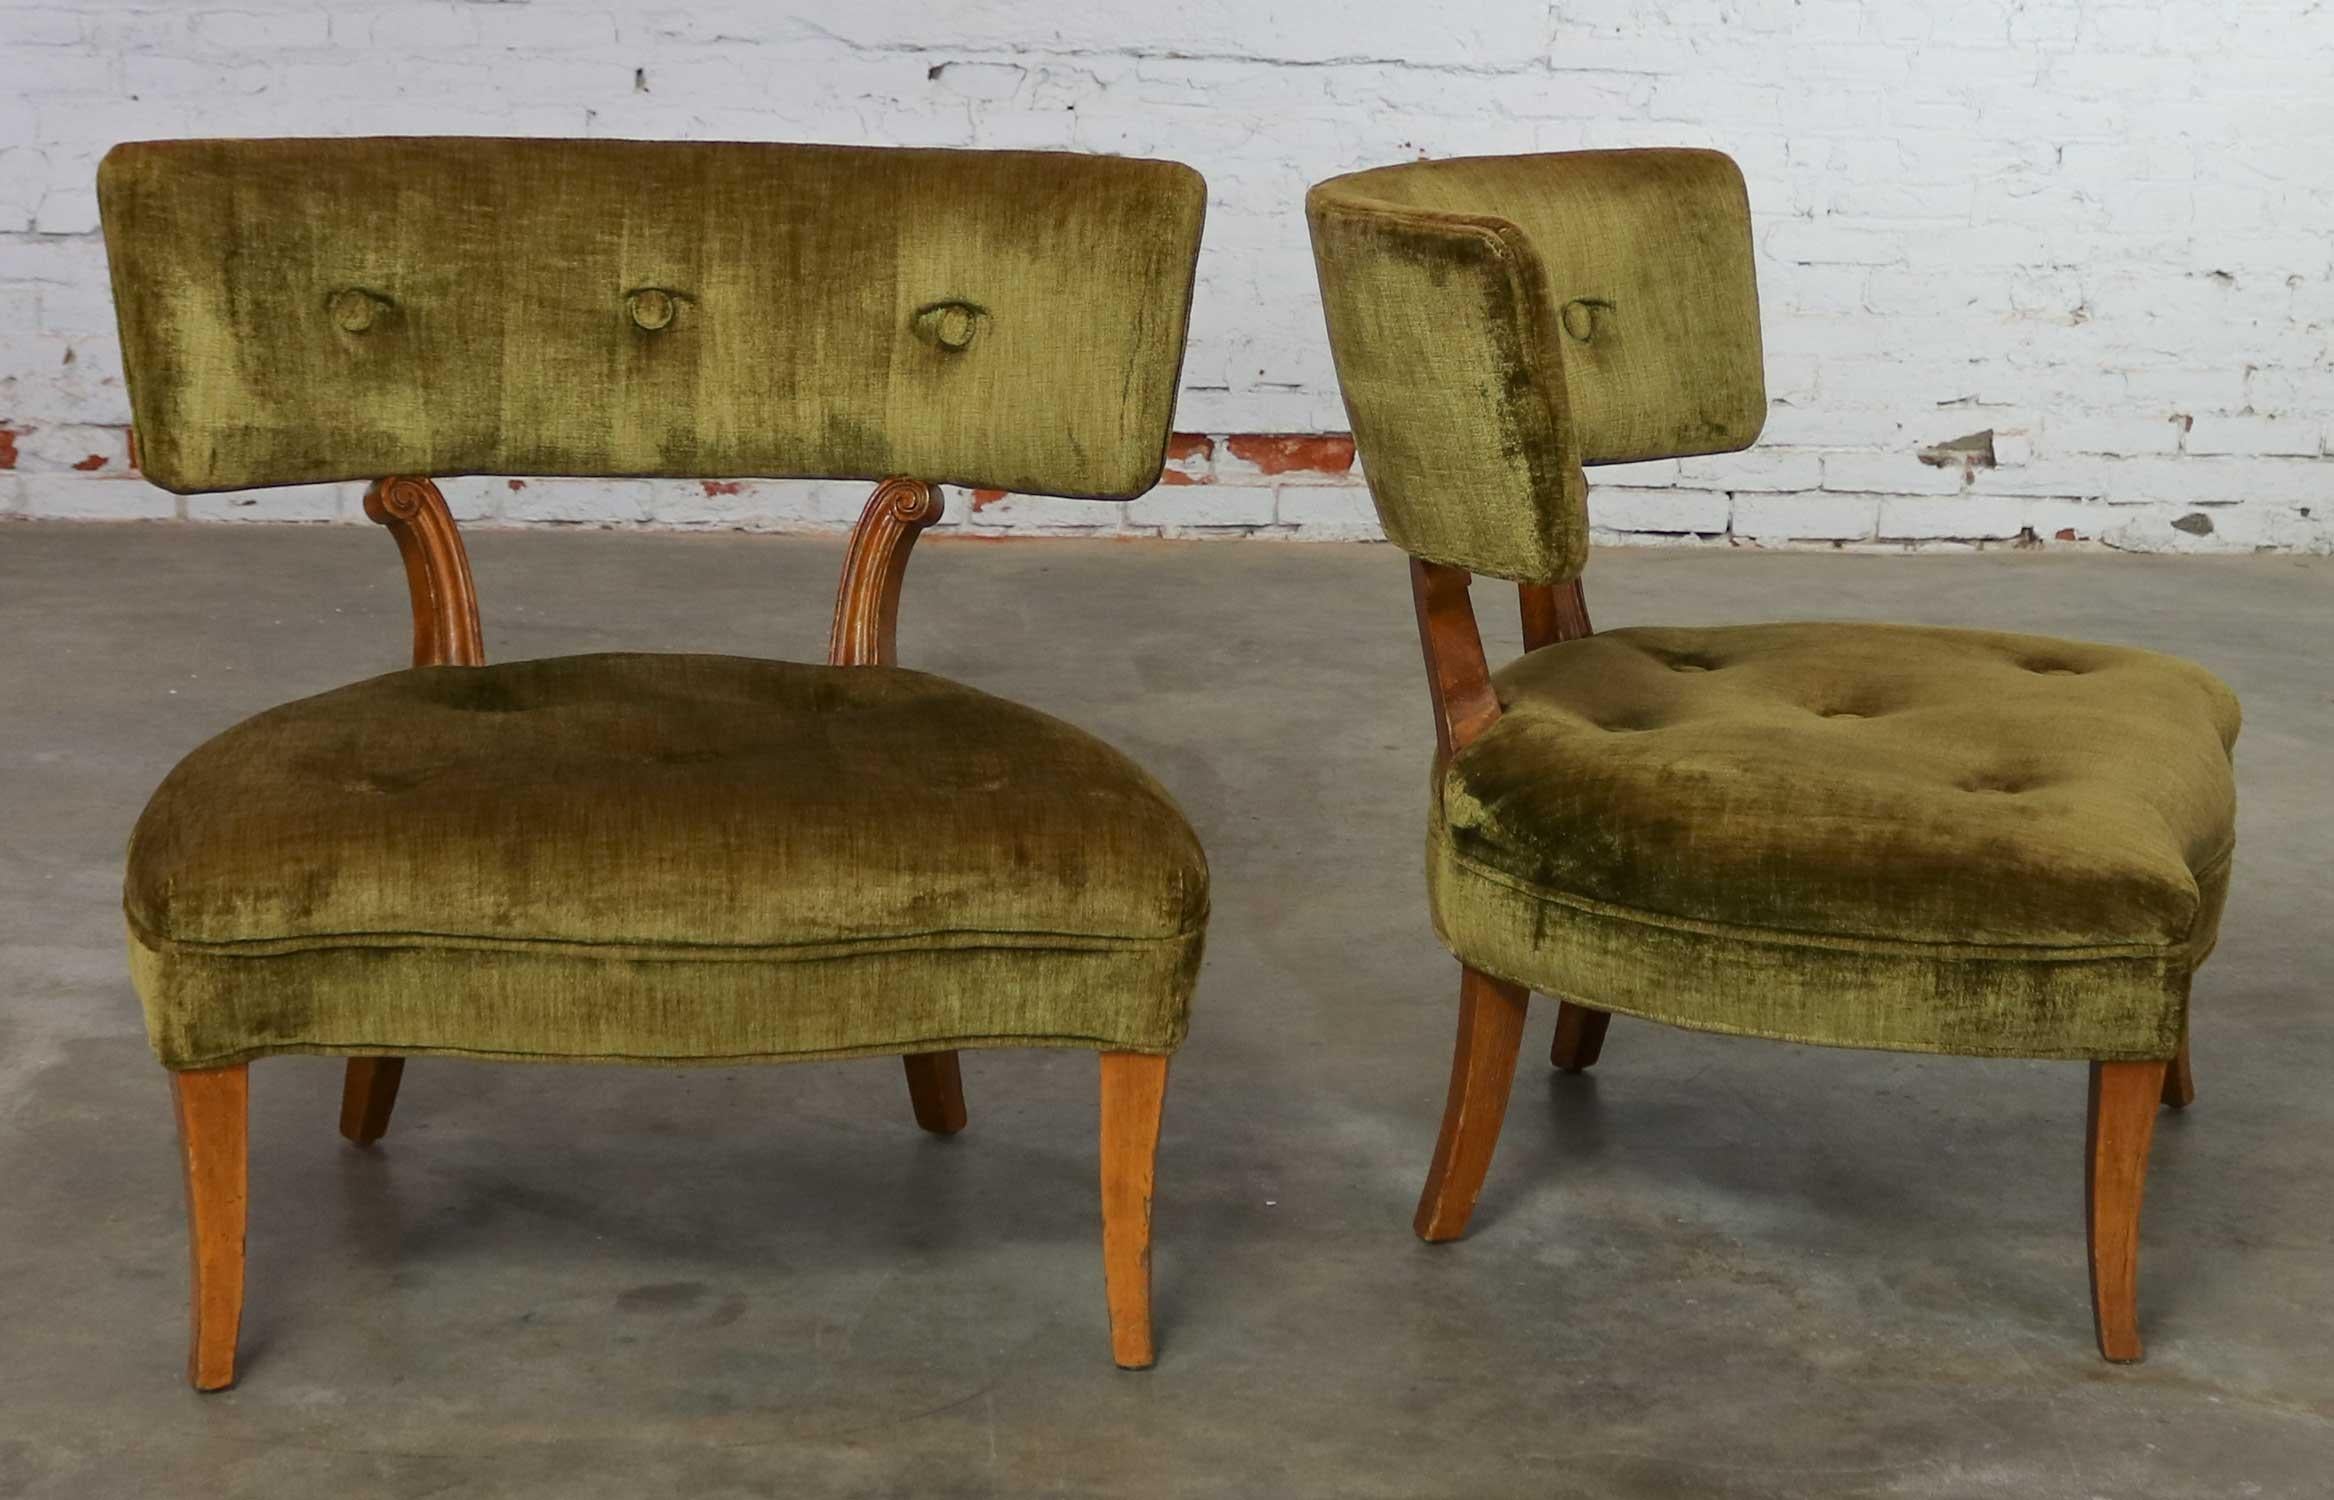 Lovely pair of Hollywood Regency or Transitional Modern slipper chairs in the style of Lorin Jackson for Grosfeld House. Moss green velvet upholstery and curved wood legs. They are in wonderful vintage original condition with perfectly aged patina.